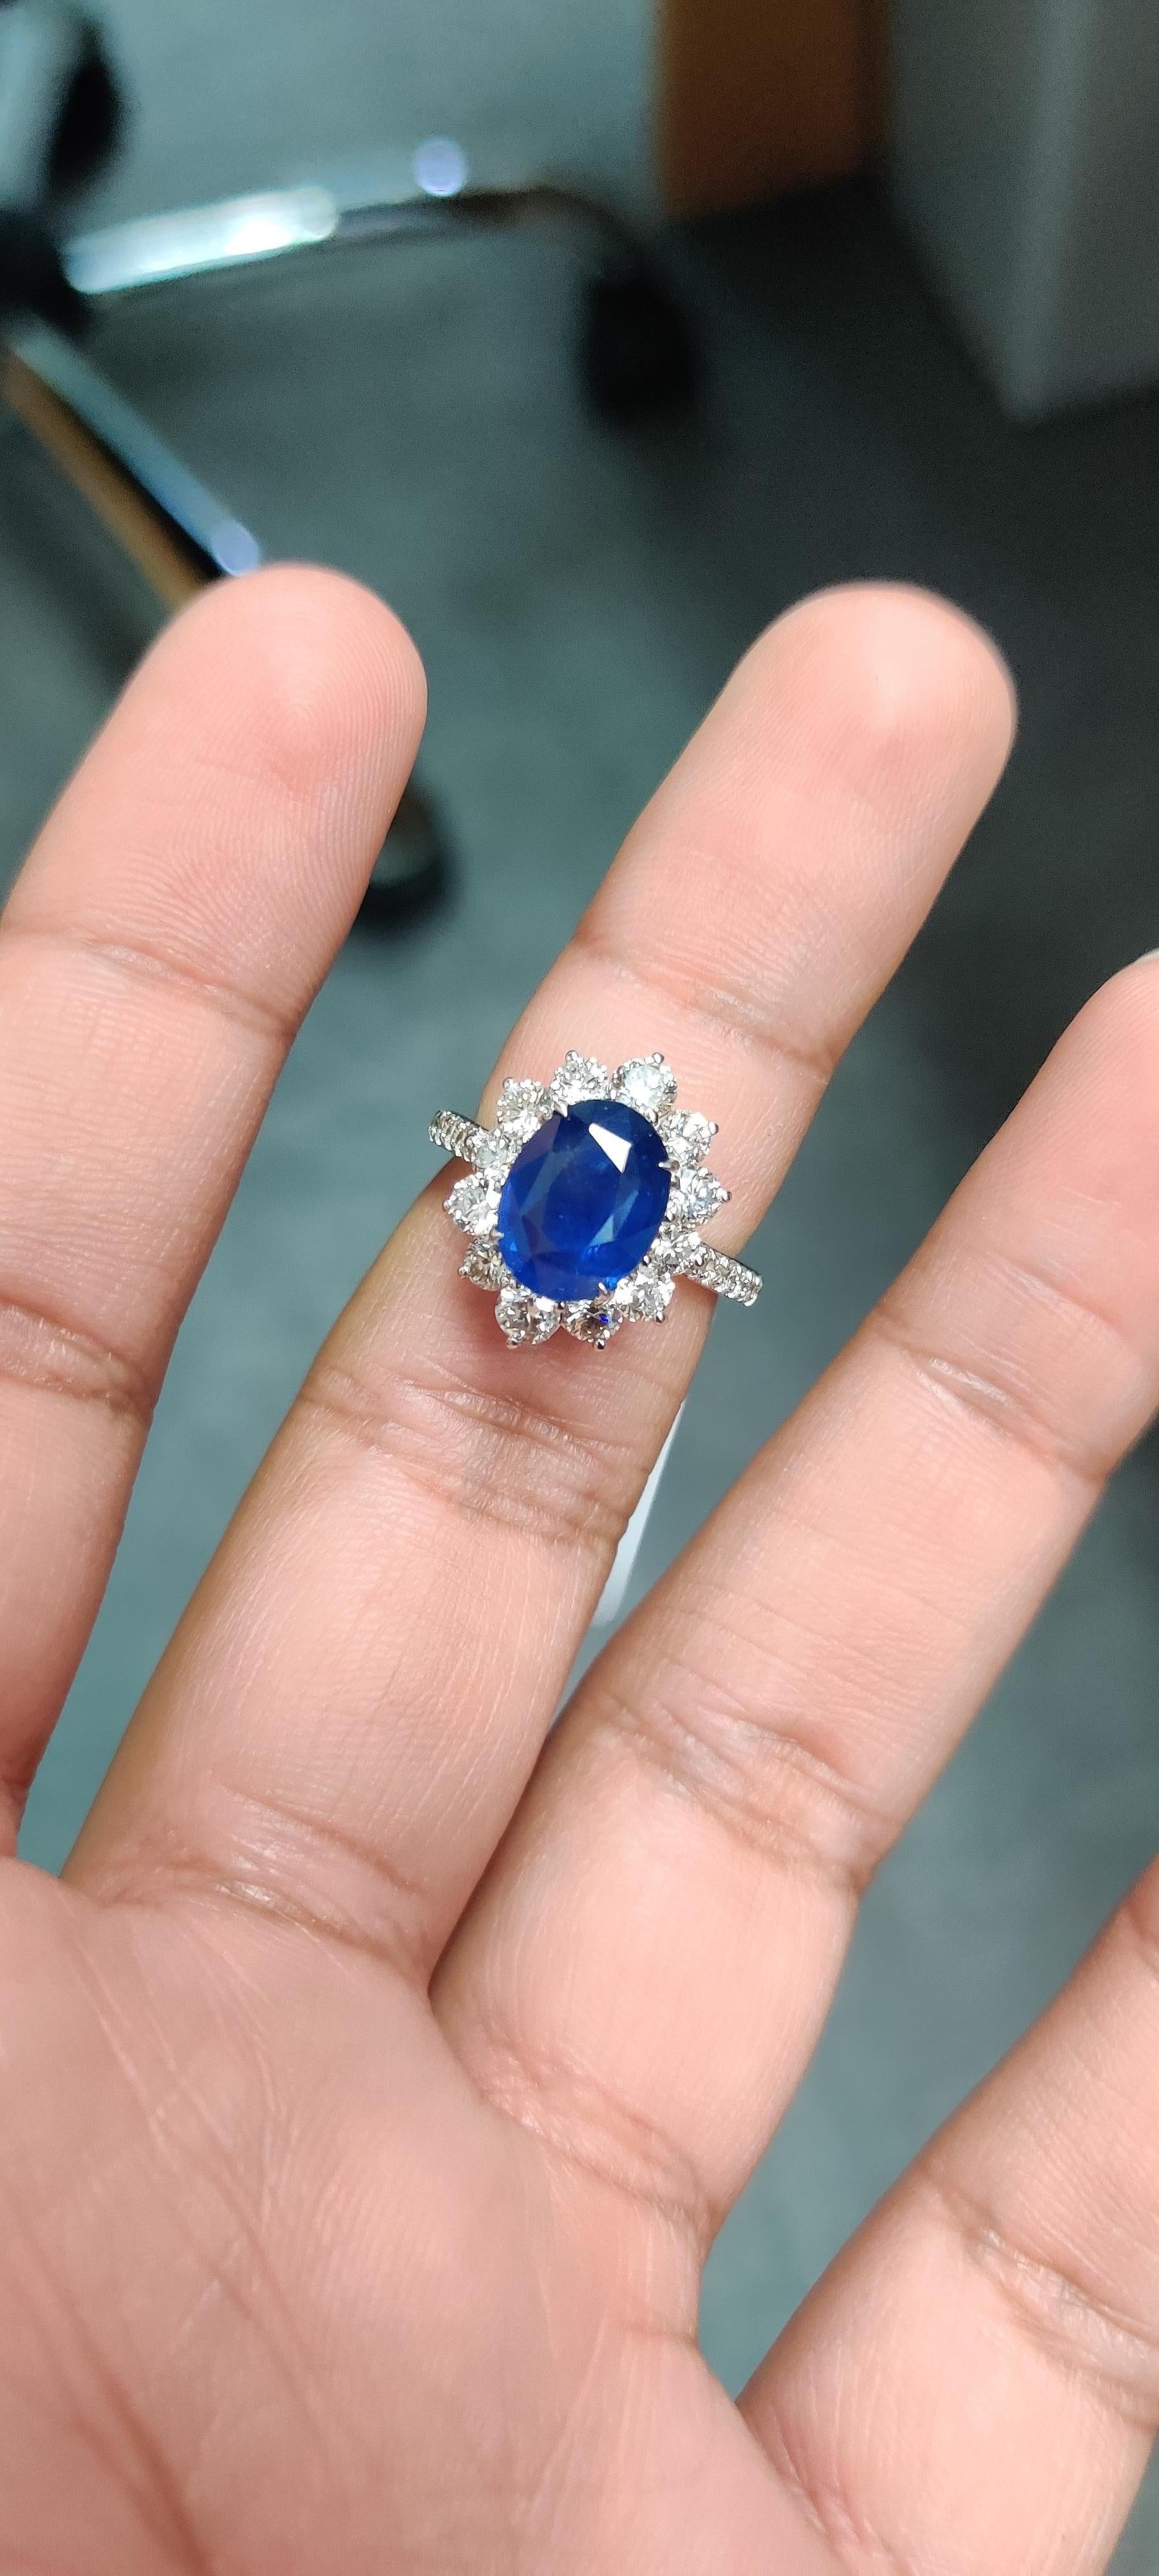 4.19 Carat Sapphire Diamond Cocktail Ring For Sale 3